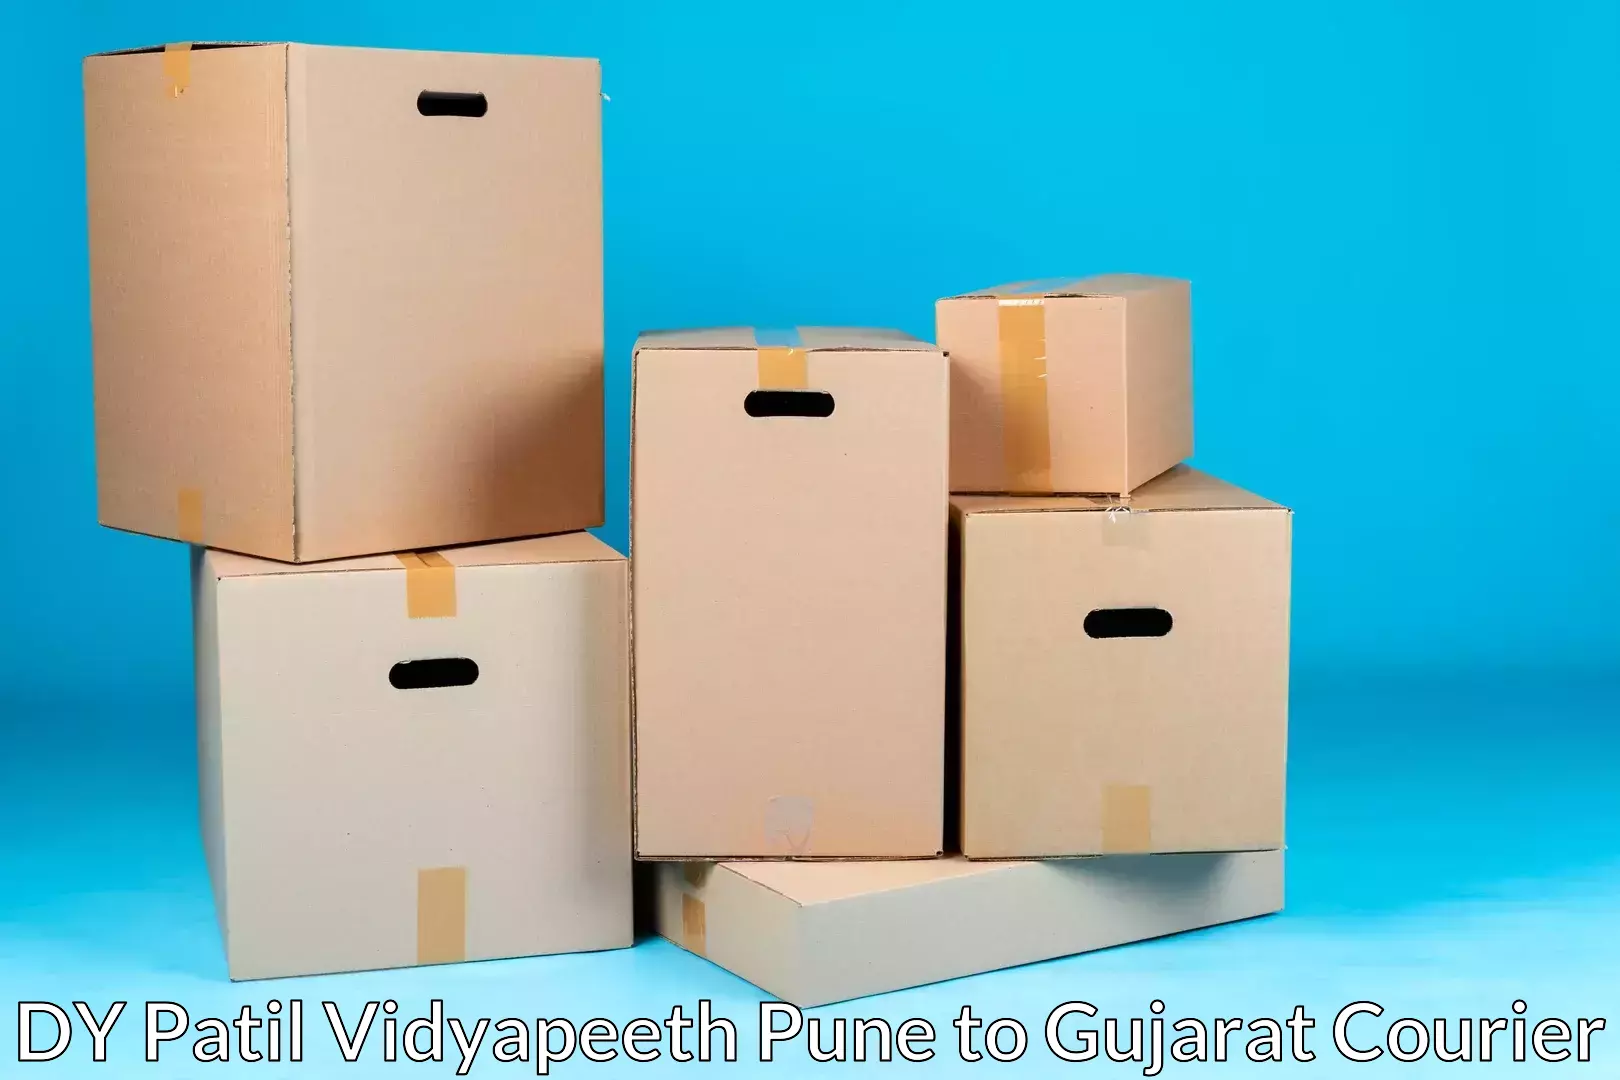 Professional furniture movers DY Patil Vidyapeeth Pune to Ahmedabad